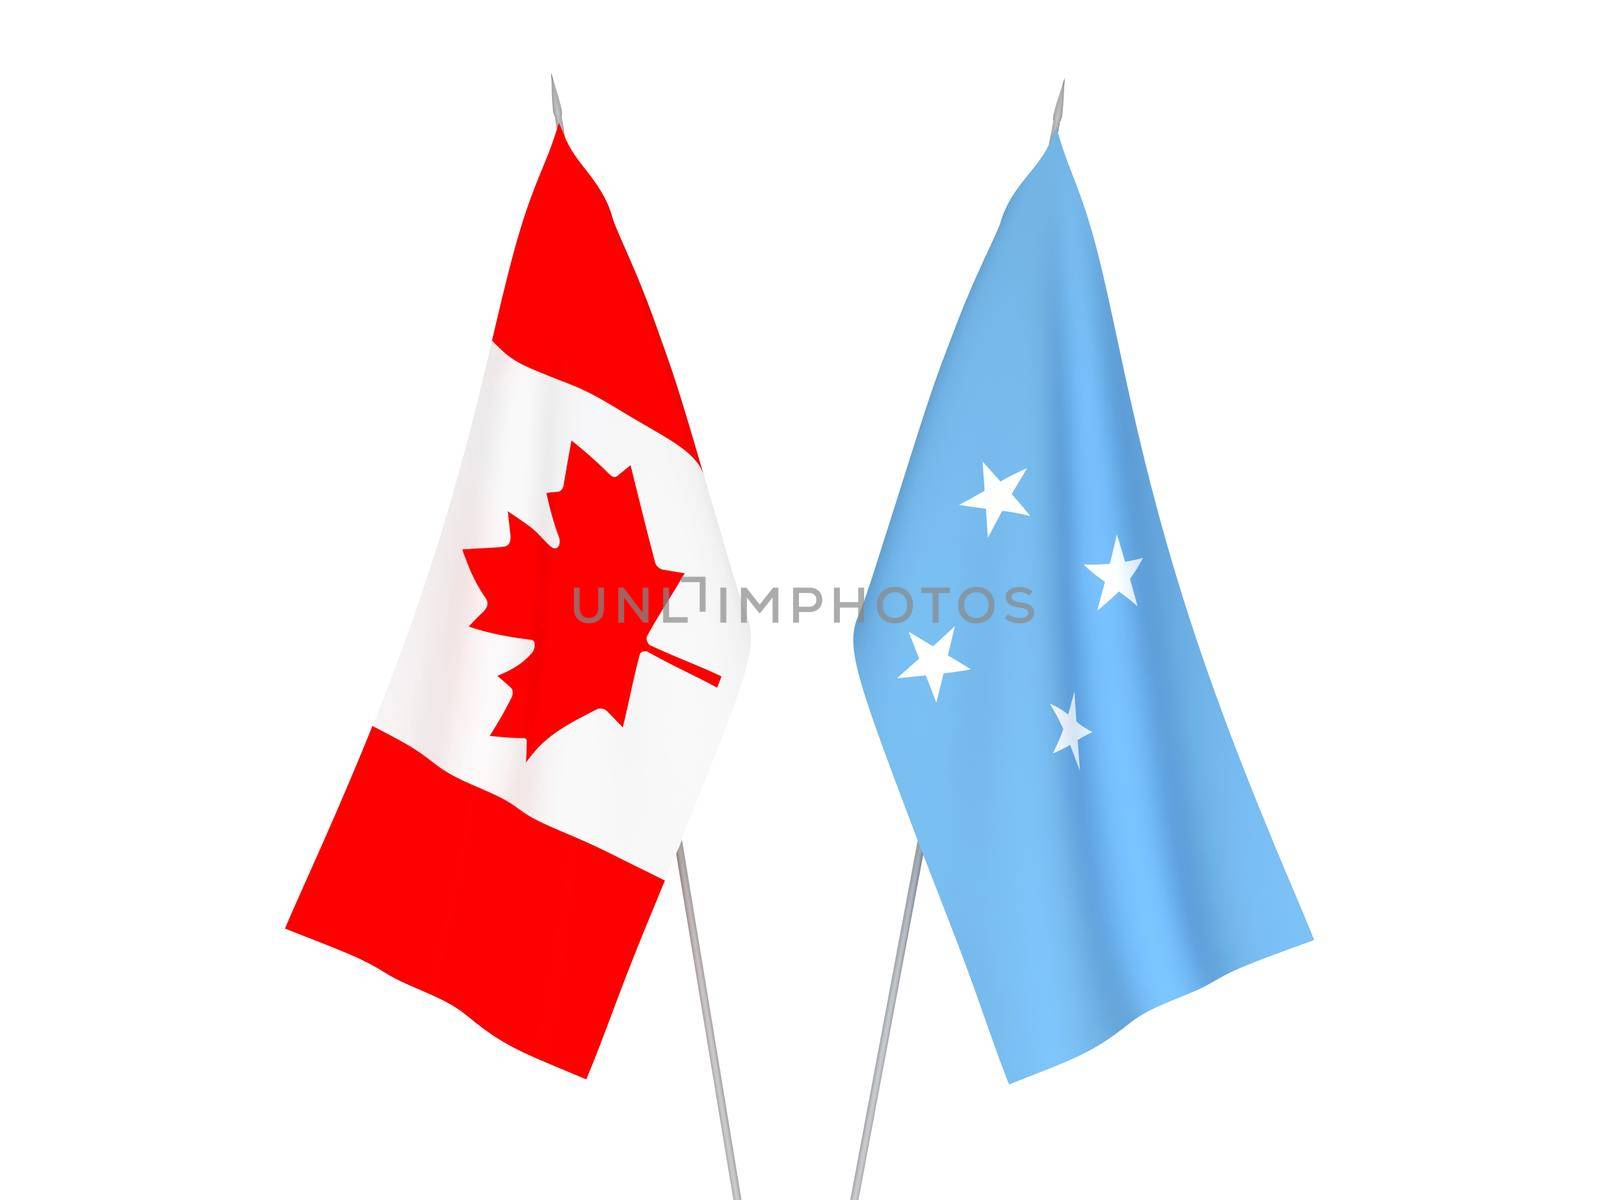 Federated States of Micronesia and Canada flags by epic33